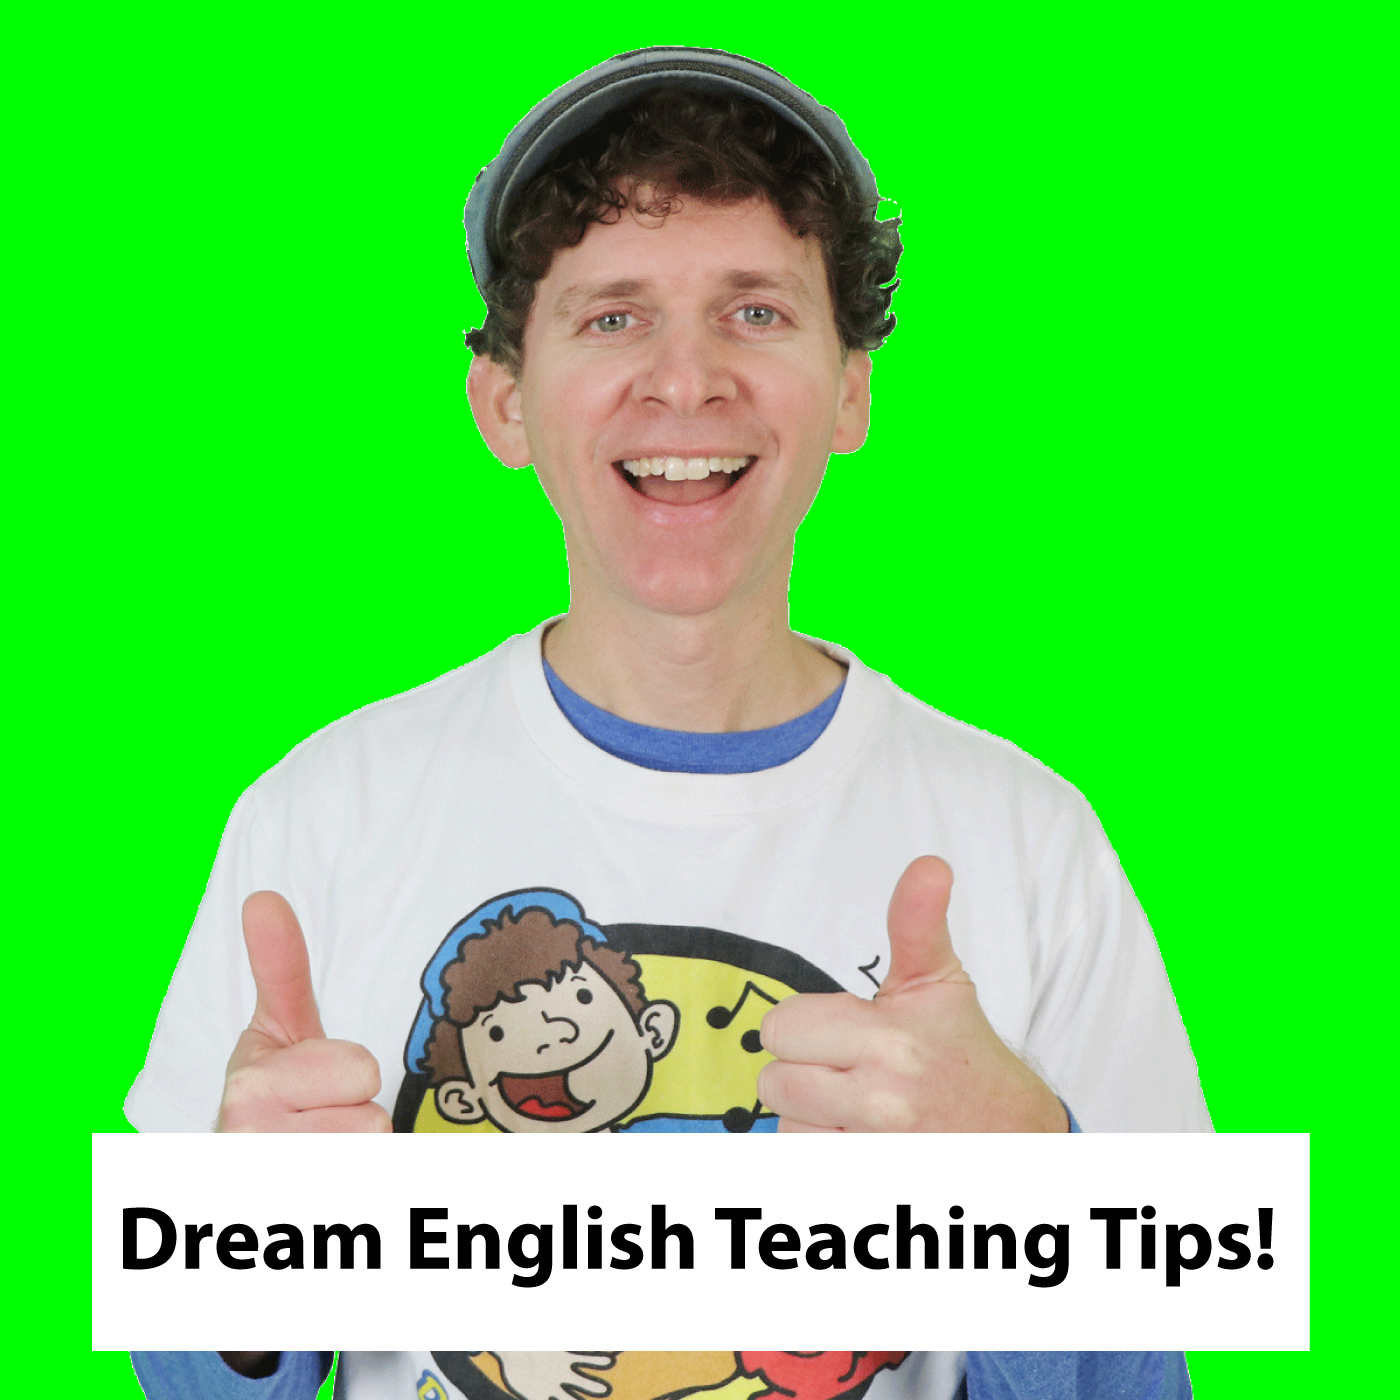 dream-english-teaching-tips-podcast-teaching-2-3-year-olds-english